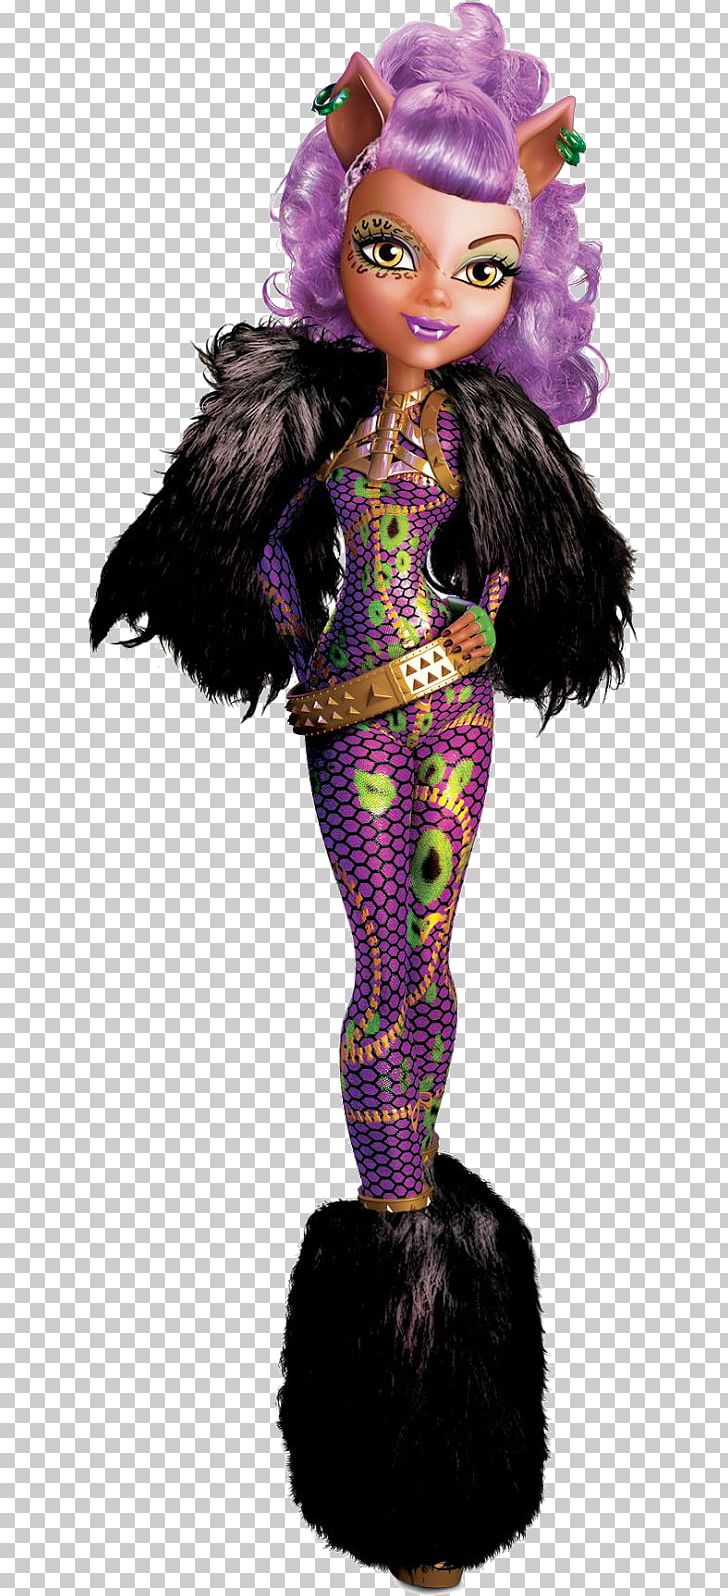 Monster High: Ghouls Rule Clawdeen Wolf Howleen Wolf Frankie Stein Cleo DeNile PNG, Clipart, Barbie, Cam Clarke, Clawdeen Wolf, Cleo Denile, Deuce Gorgon Free PNG Download